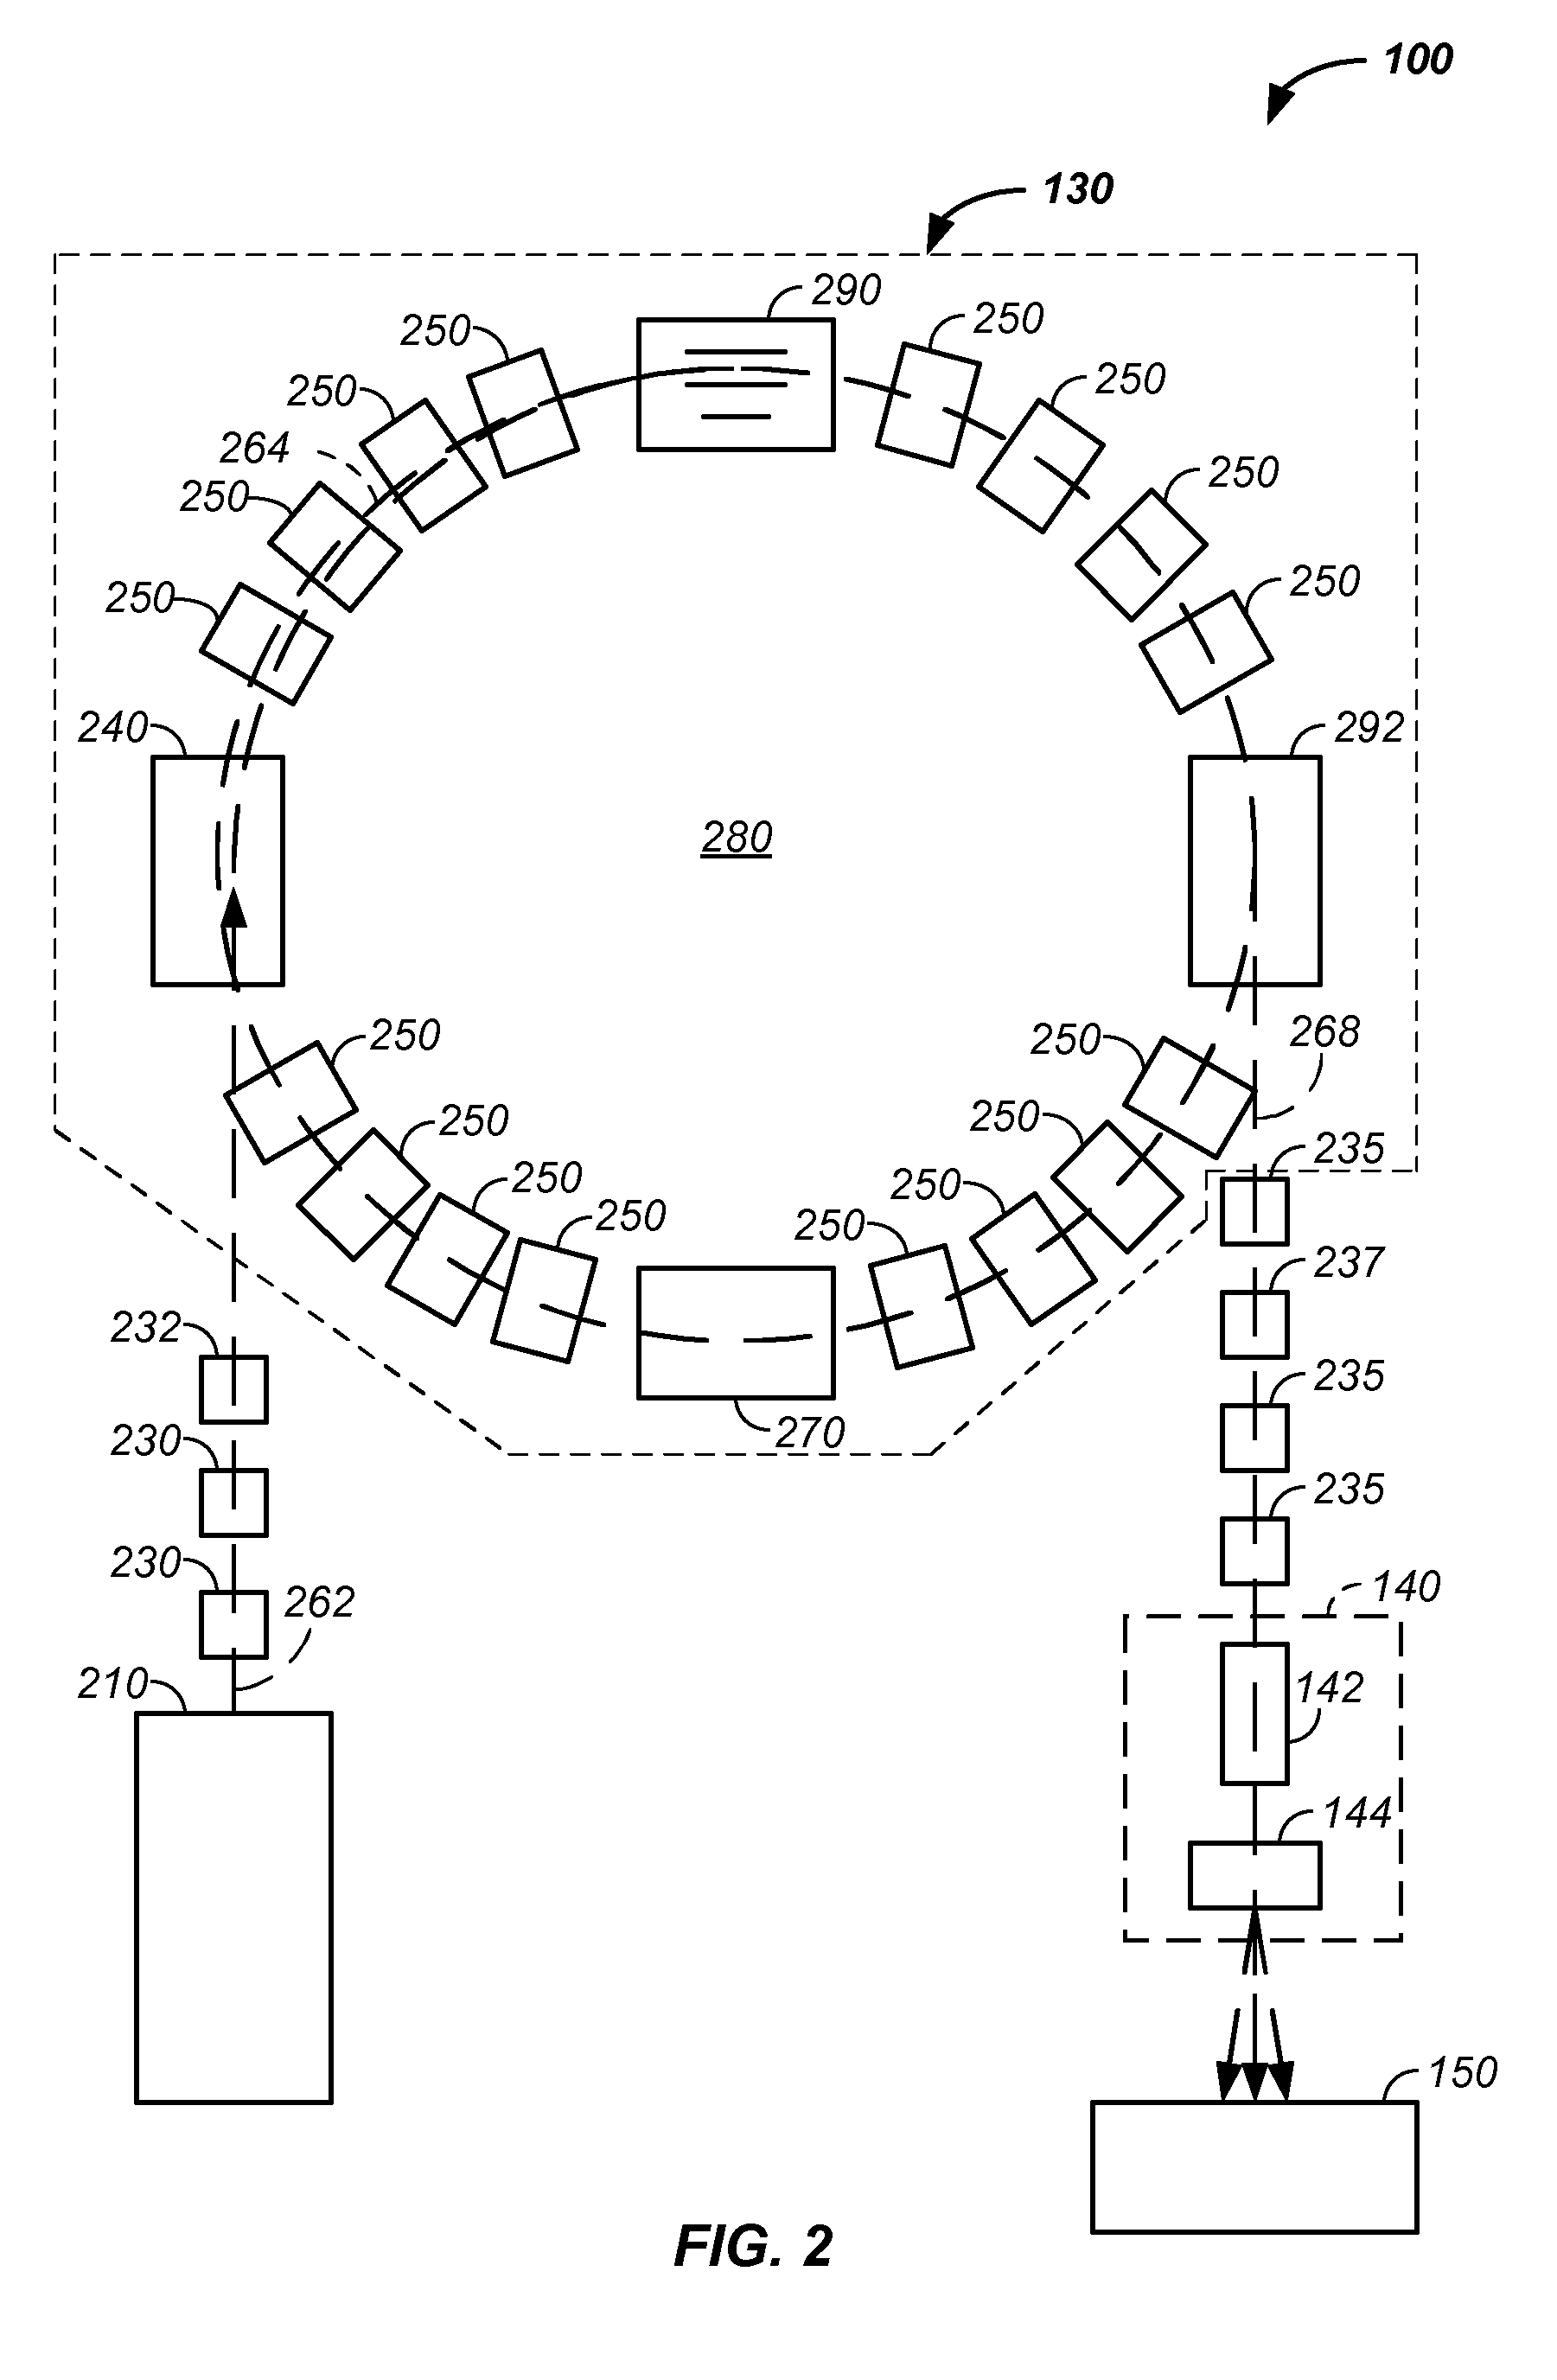 Elongated lifetime X-ray method and apparatus used in conjunction with a charged particle cancer therapy system